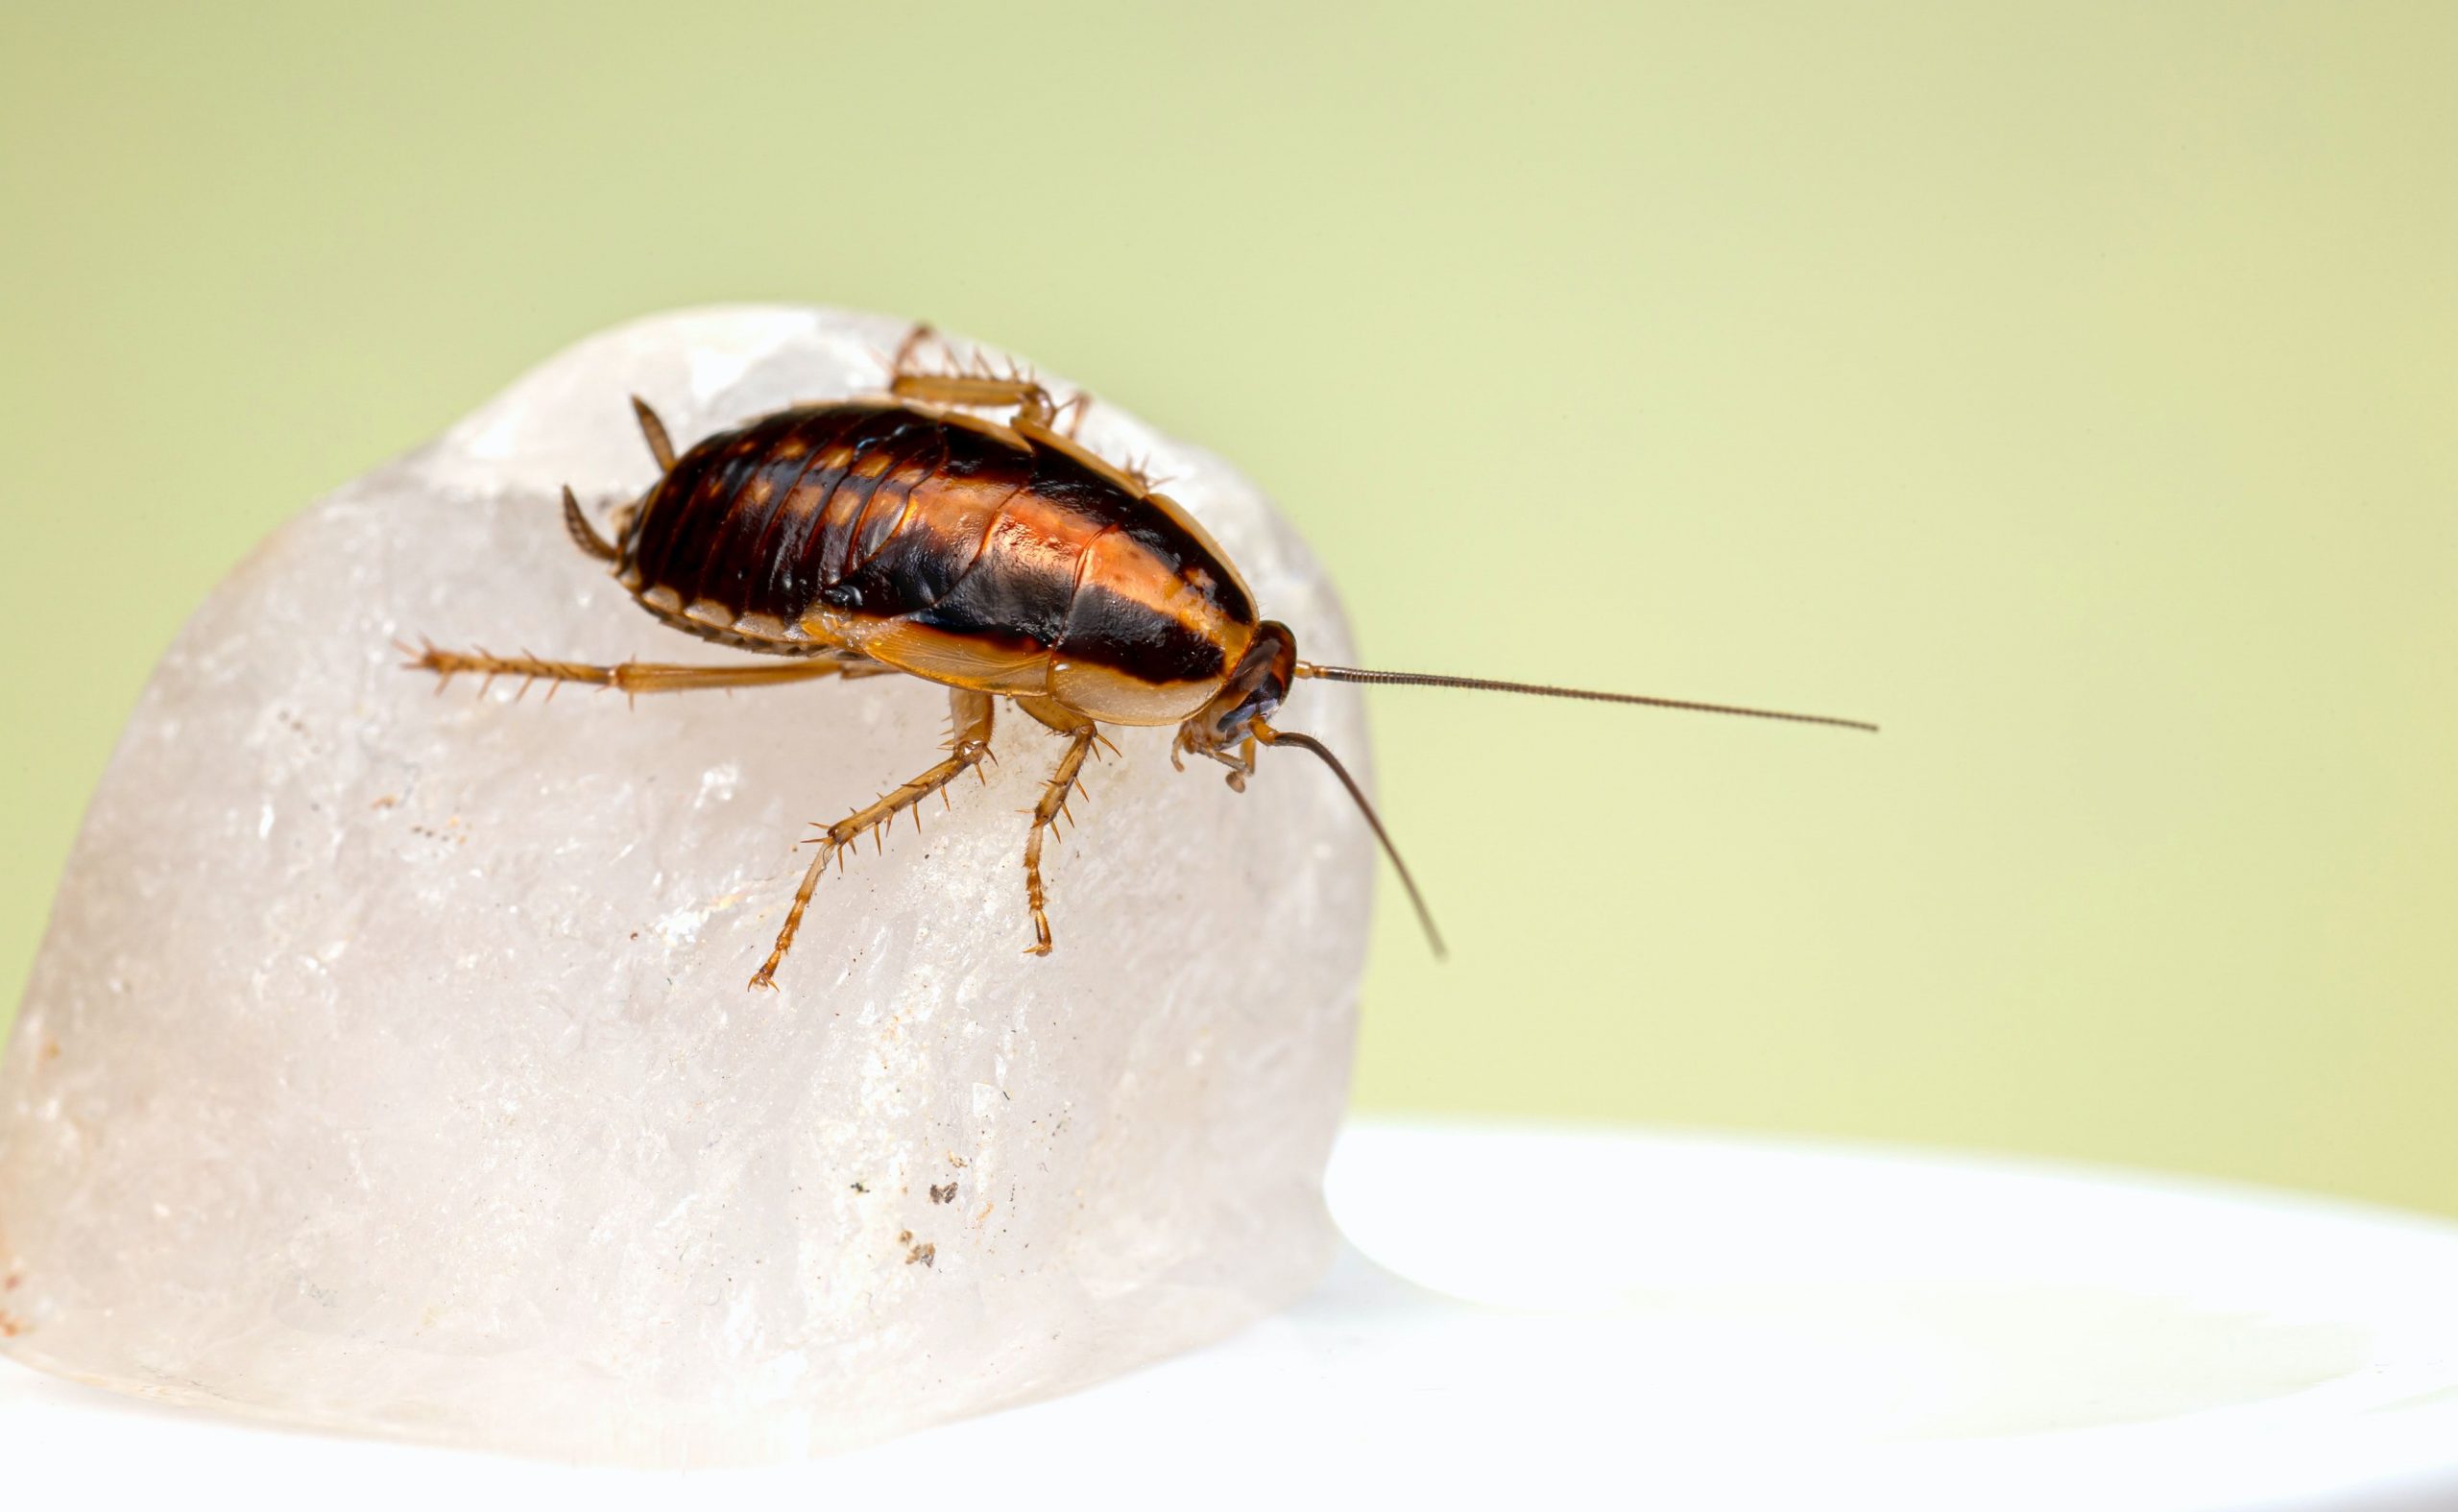 Watch: The cockroach-of-the-match at Tokyo Olympics 2020